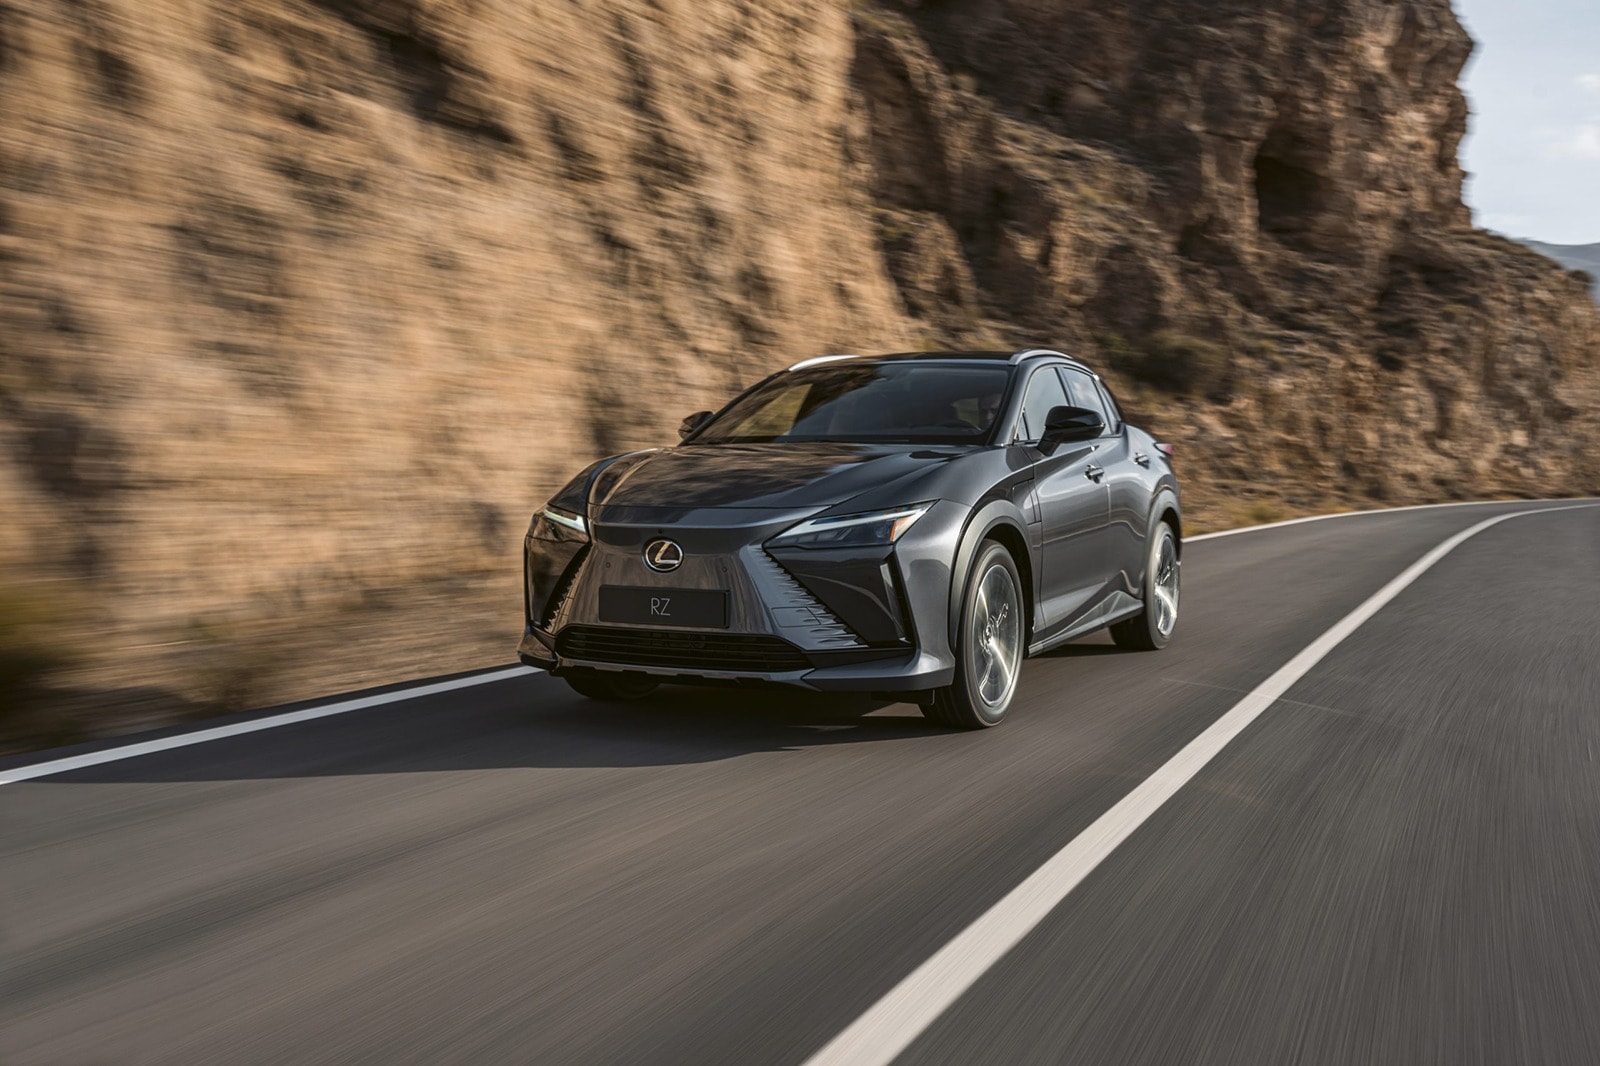 The 2023 Lexus RZ 450e Will Be the Automaker's First EV Sold in the U.S.